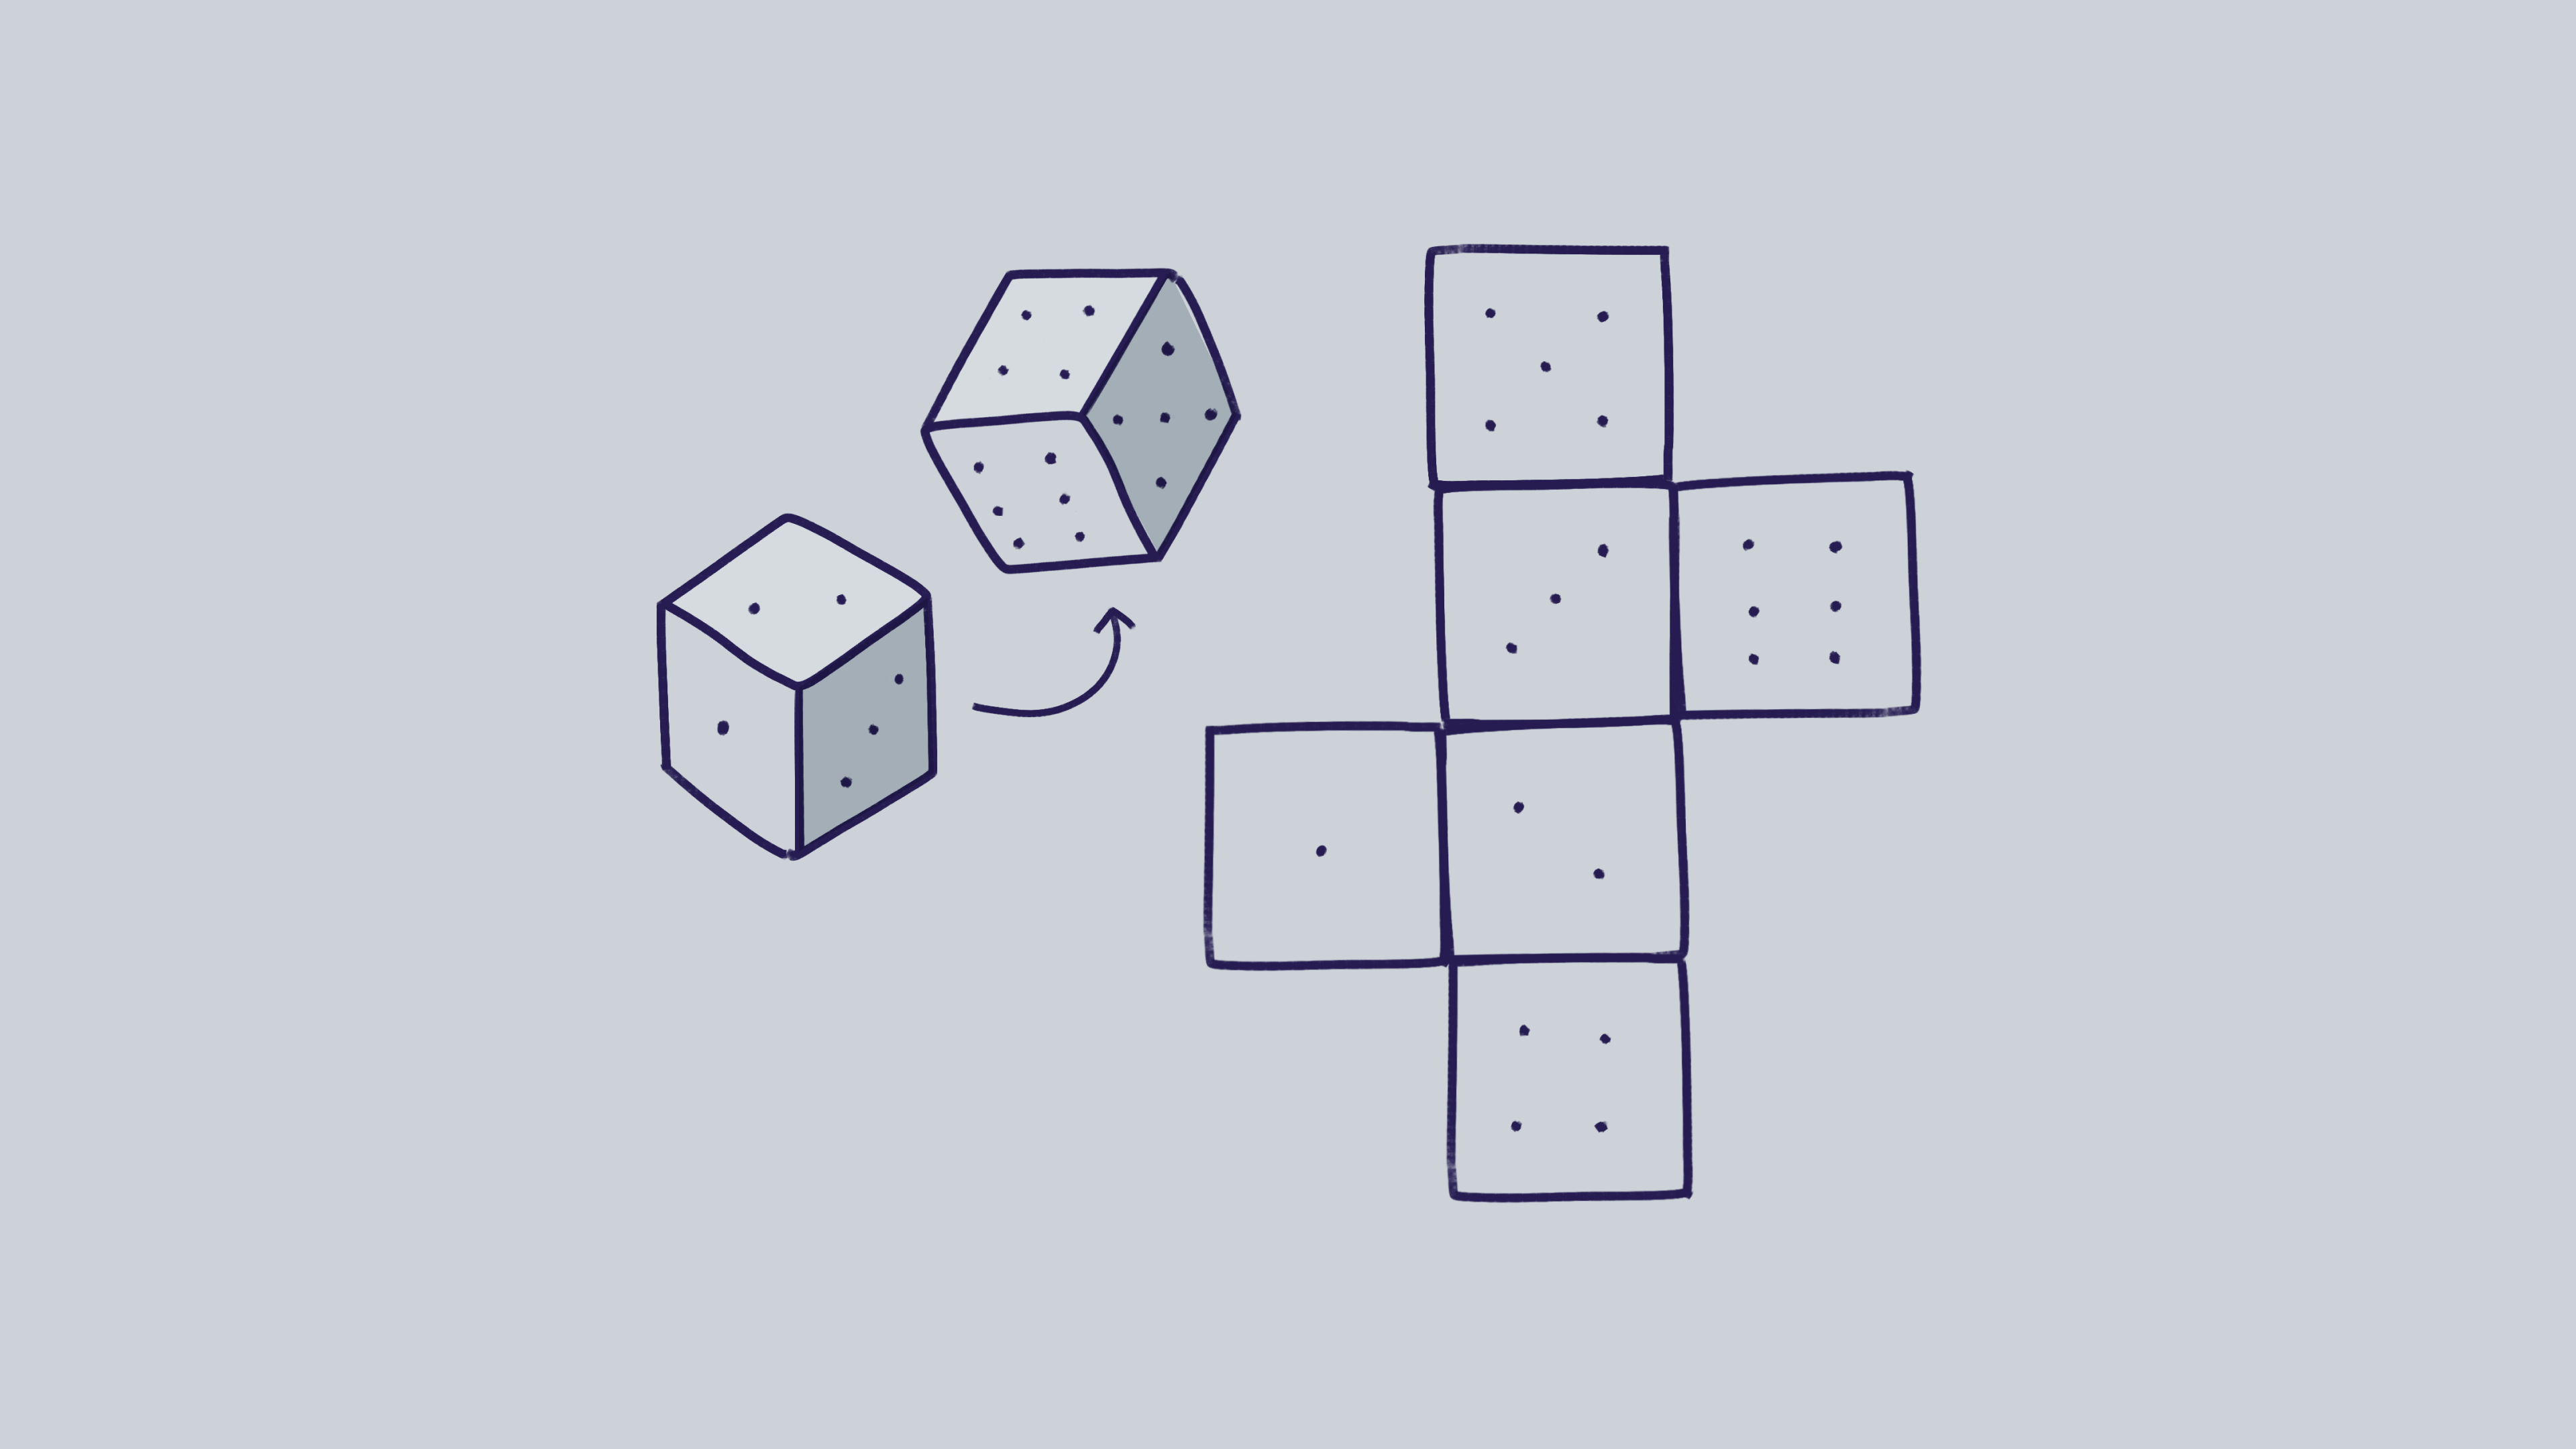 A drawing of a die from two different angles and a flattened-out version